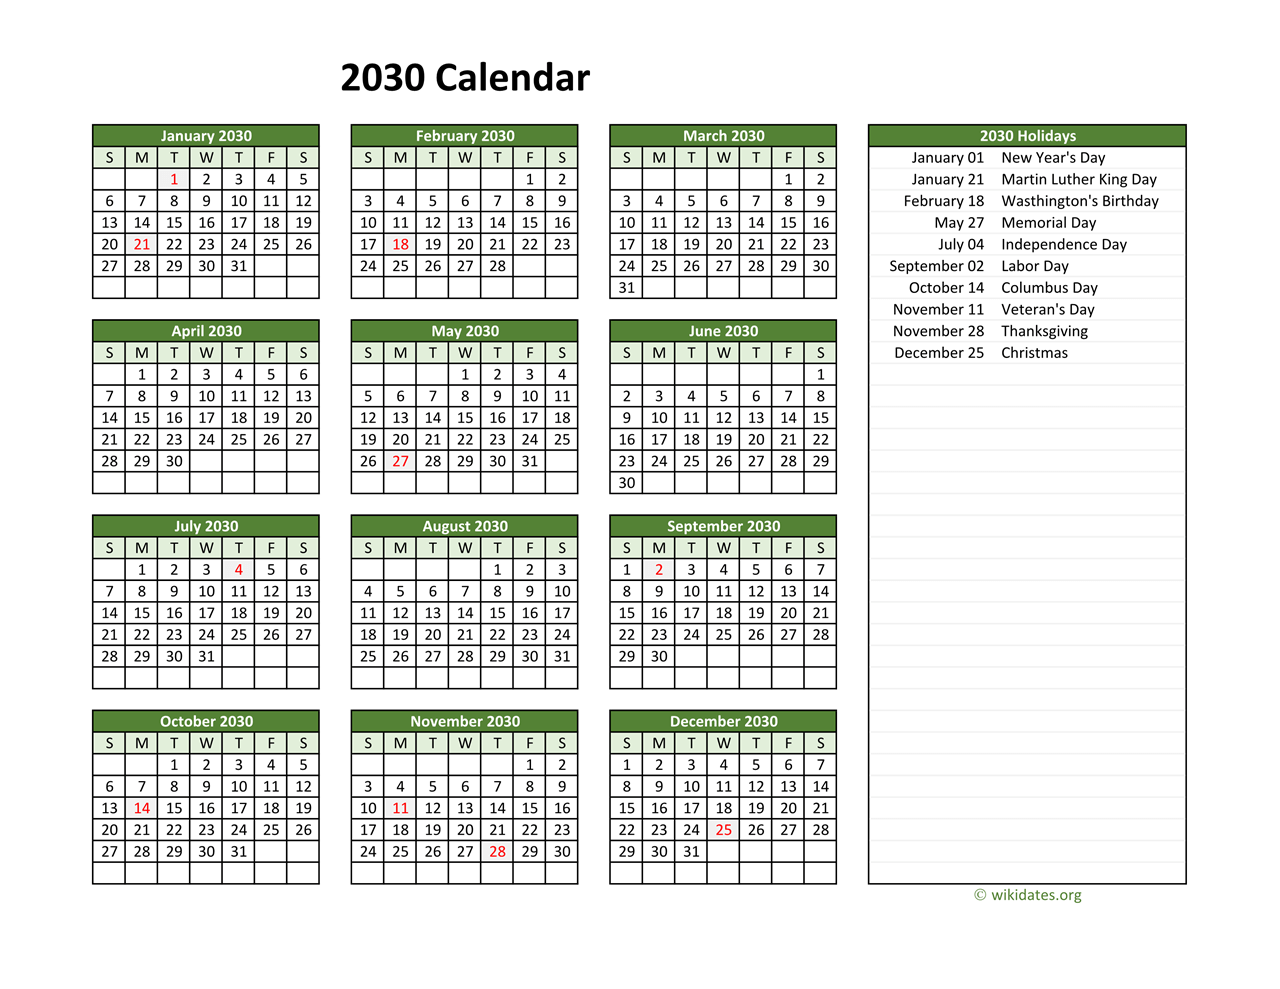 printable-2030-calendar-with-federal-holidays-wikidates